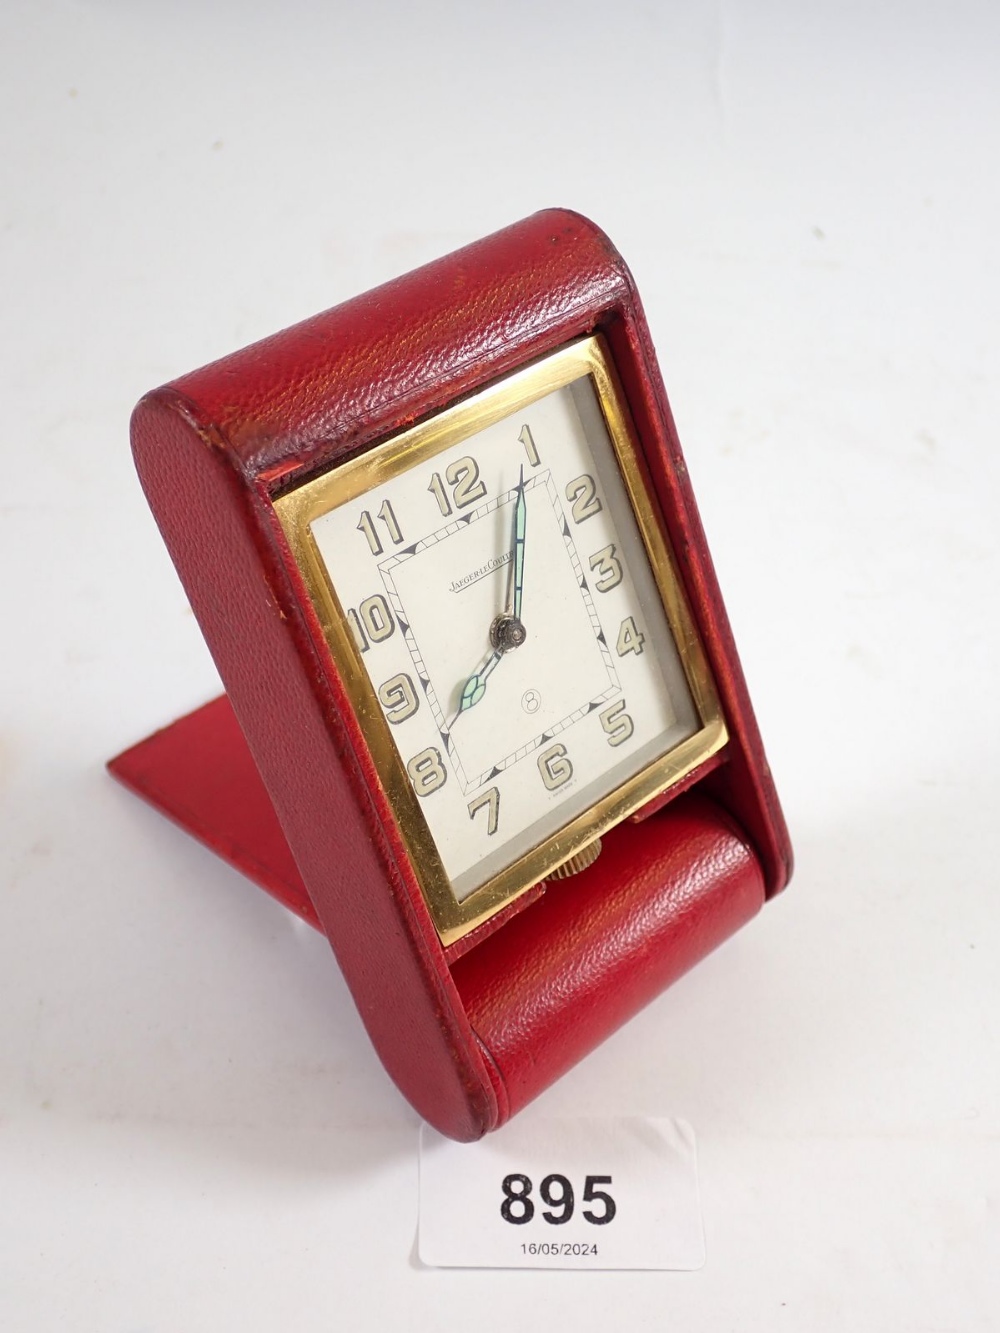 An Art Deco Jaeger le Coultre travel clock in red leather case